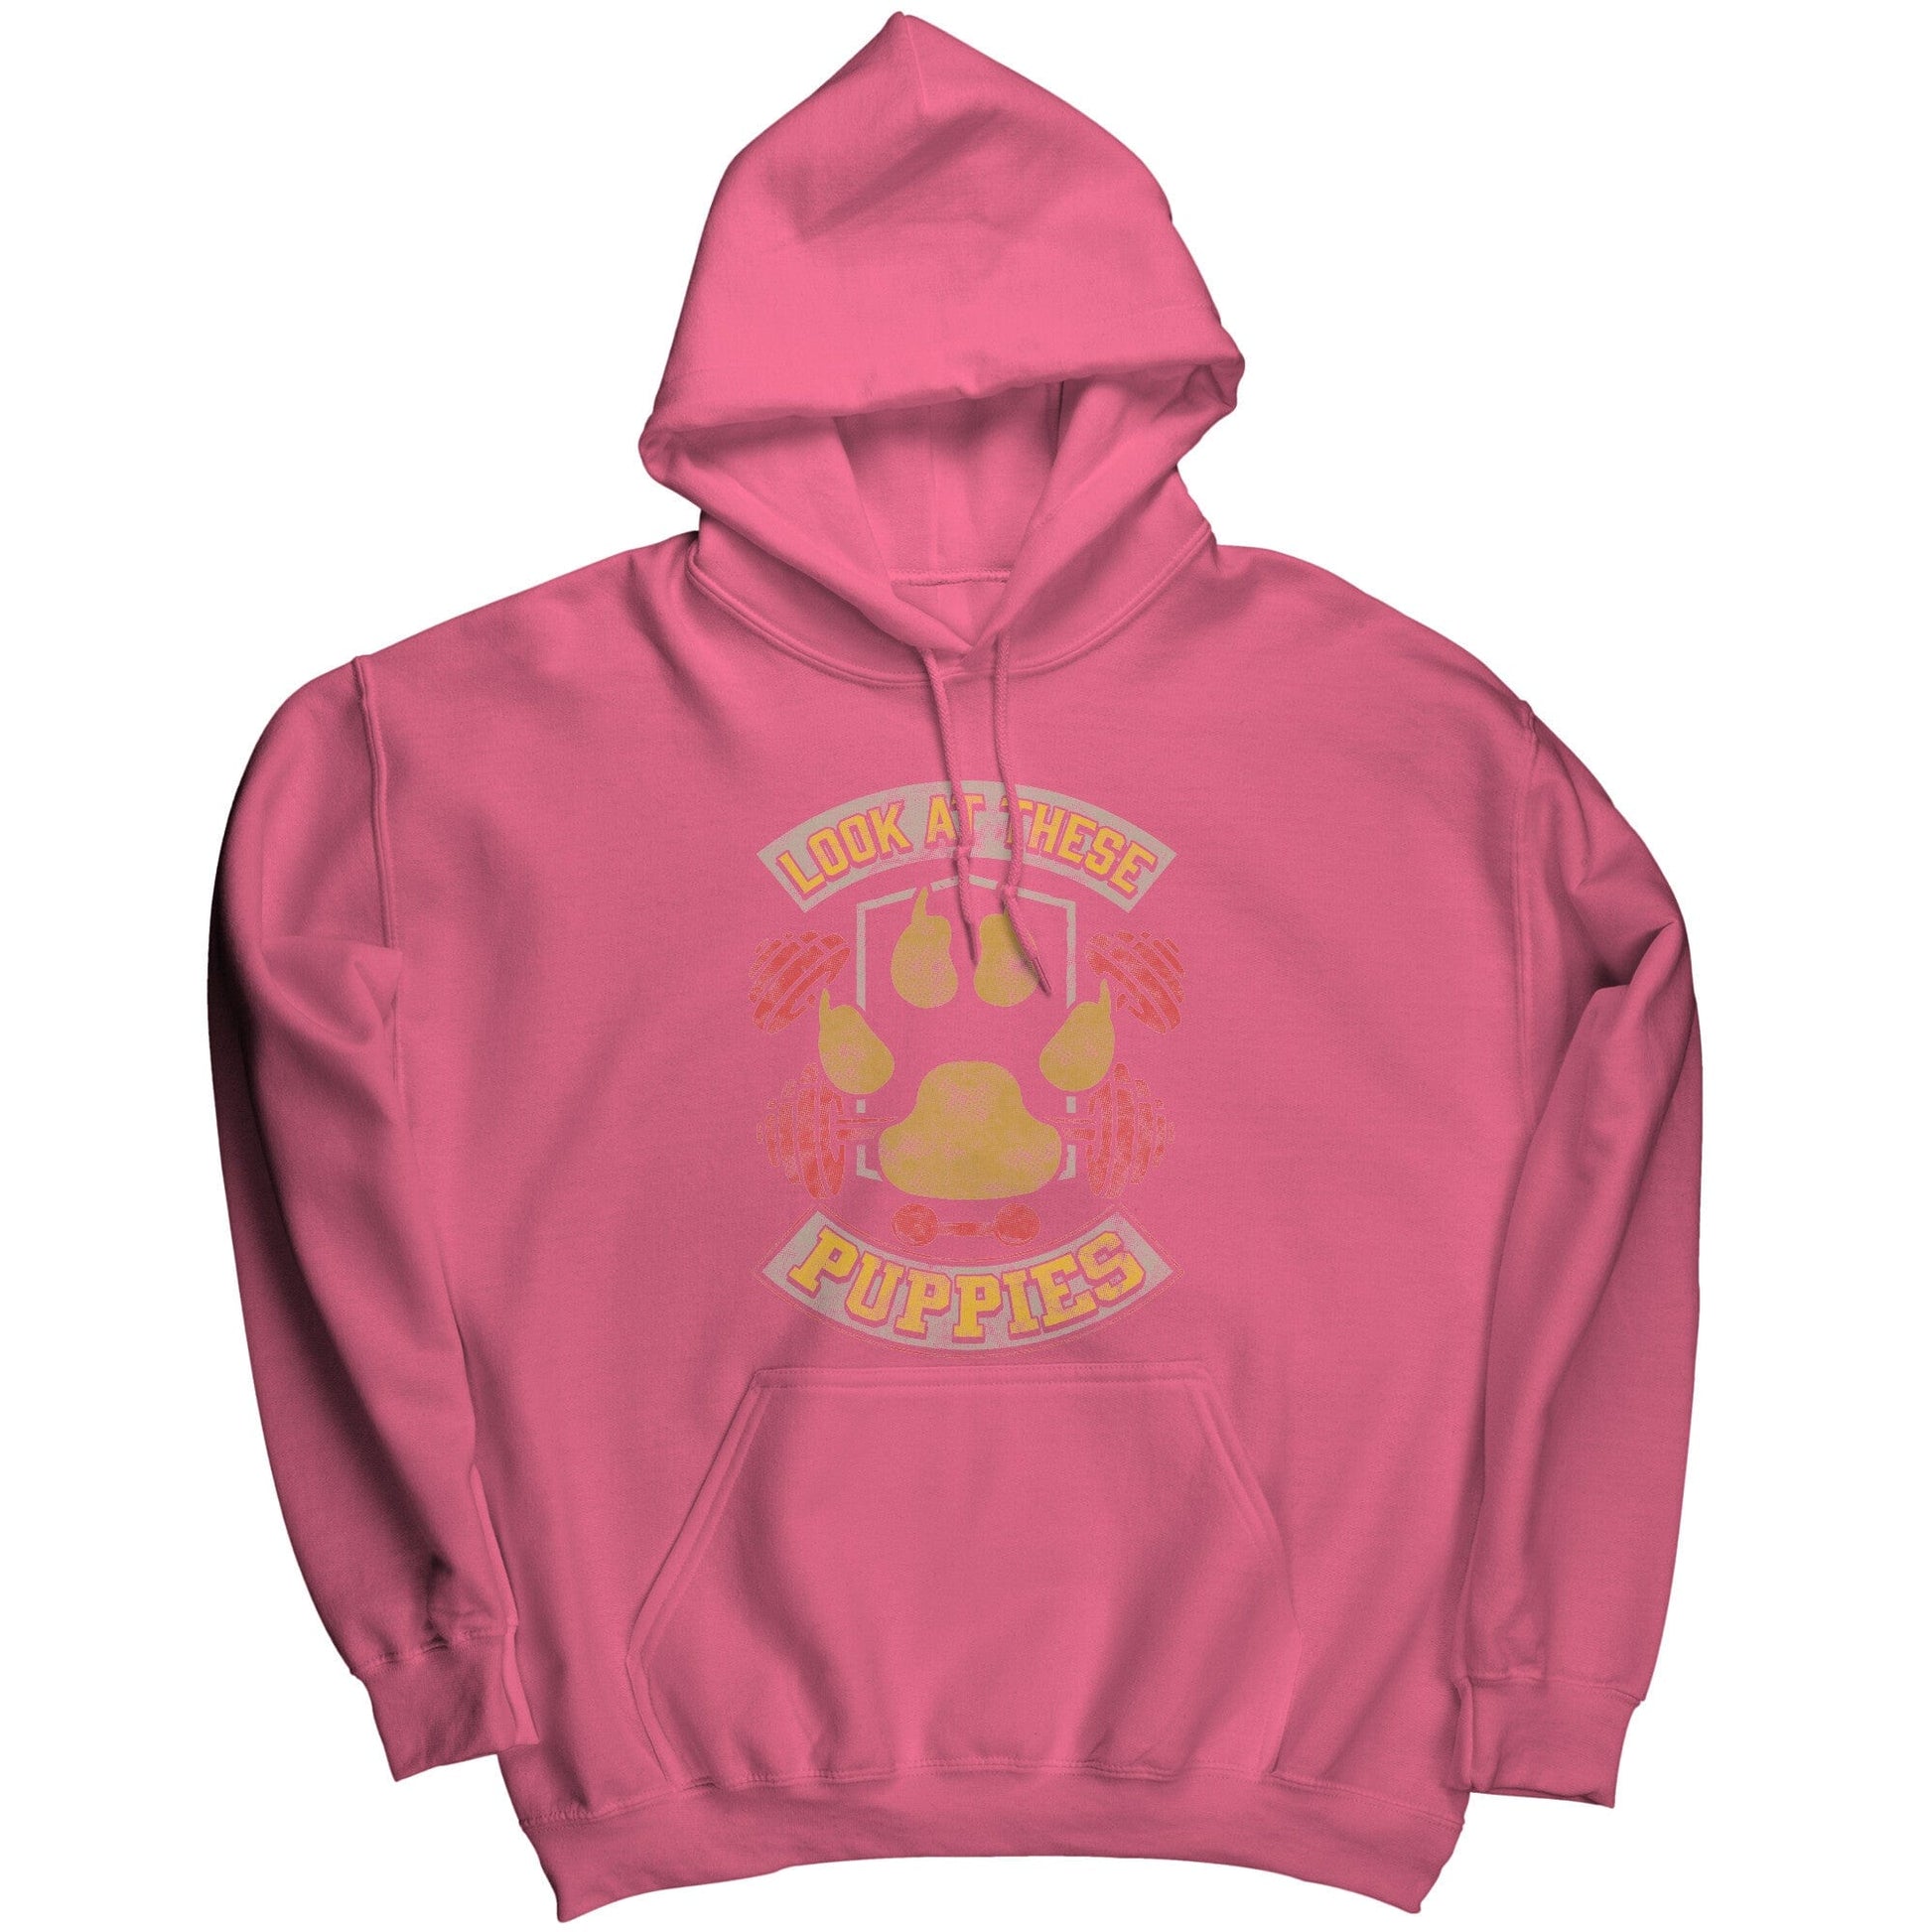 Look at these puppies muscle hoodie Neon Pink